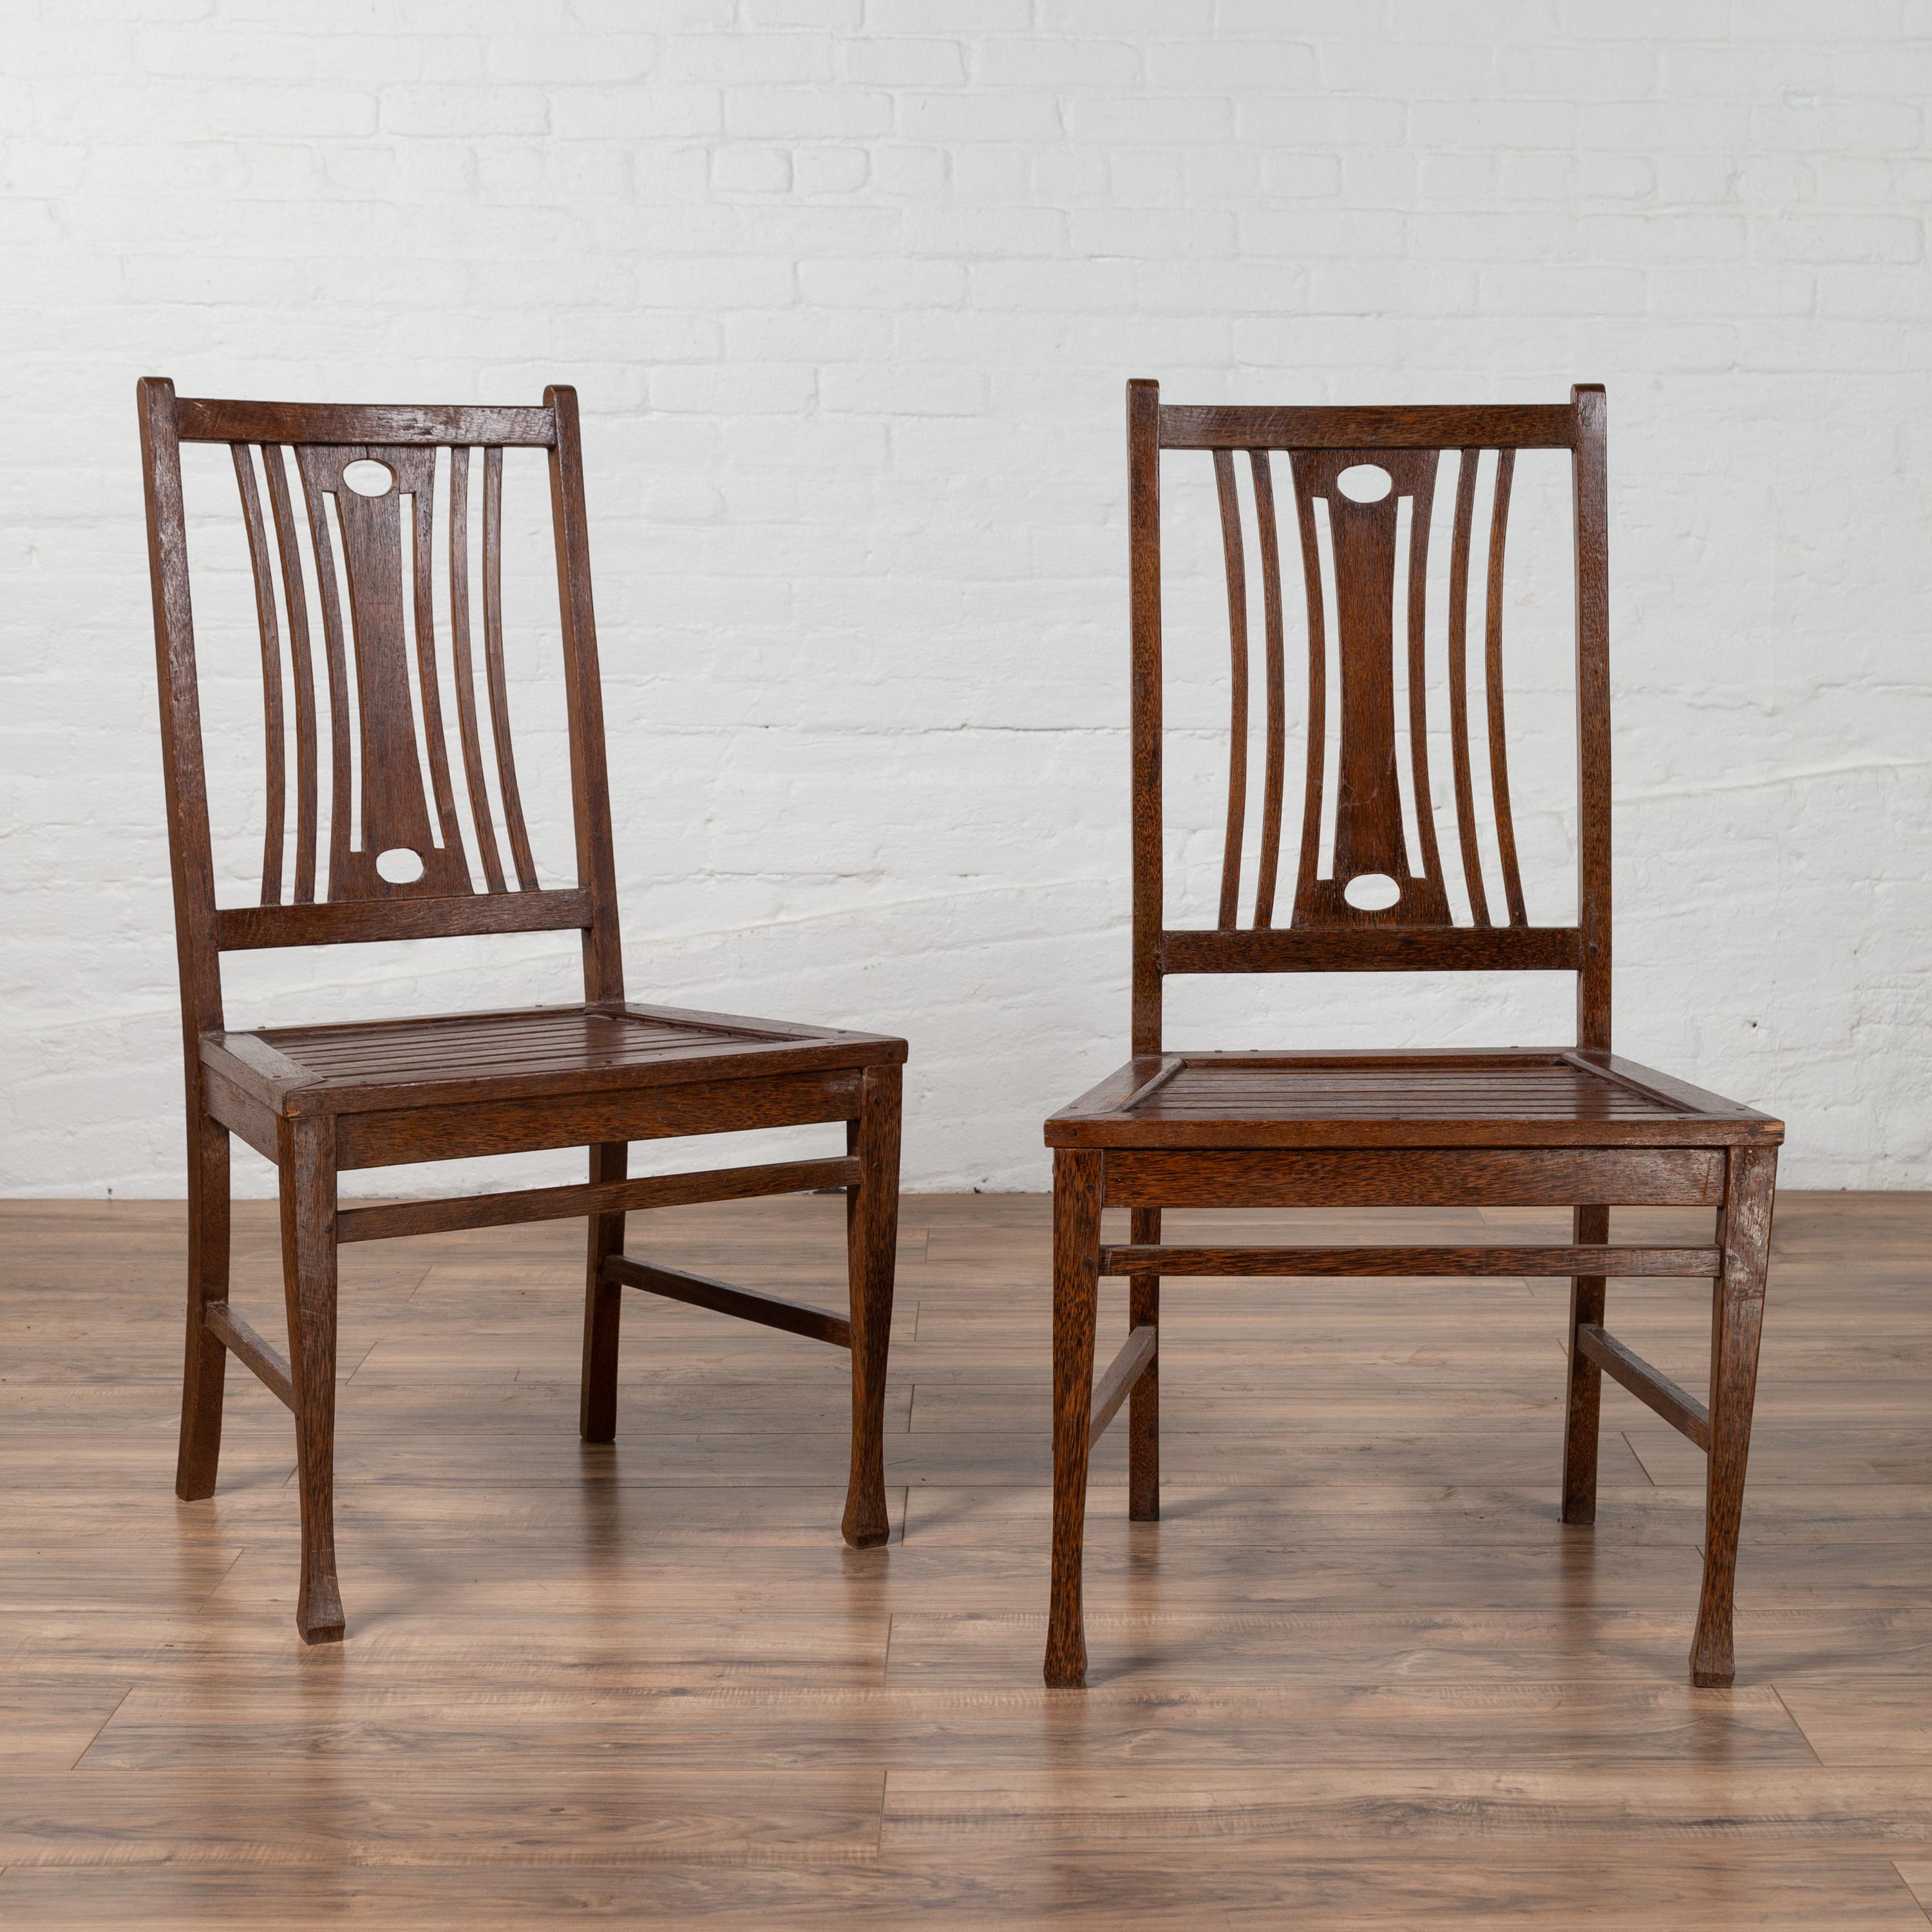 A pair of vintage Indonesian wooden side chairs from the mid-20th century, with pierced splats. We currently have two or more pairs available, priced and sold per pair. Born in Indonesia during the midcentury period, each of this pair of side chairs